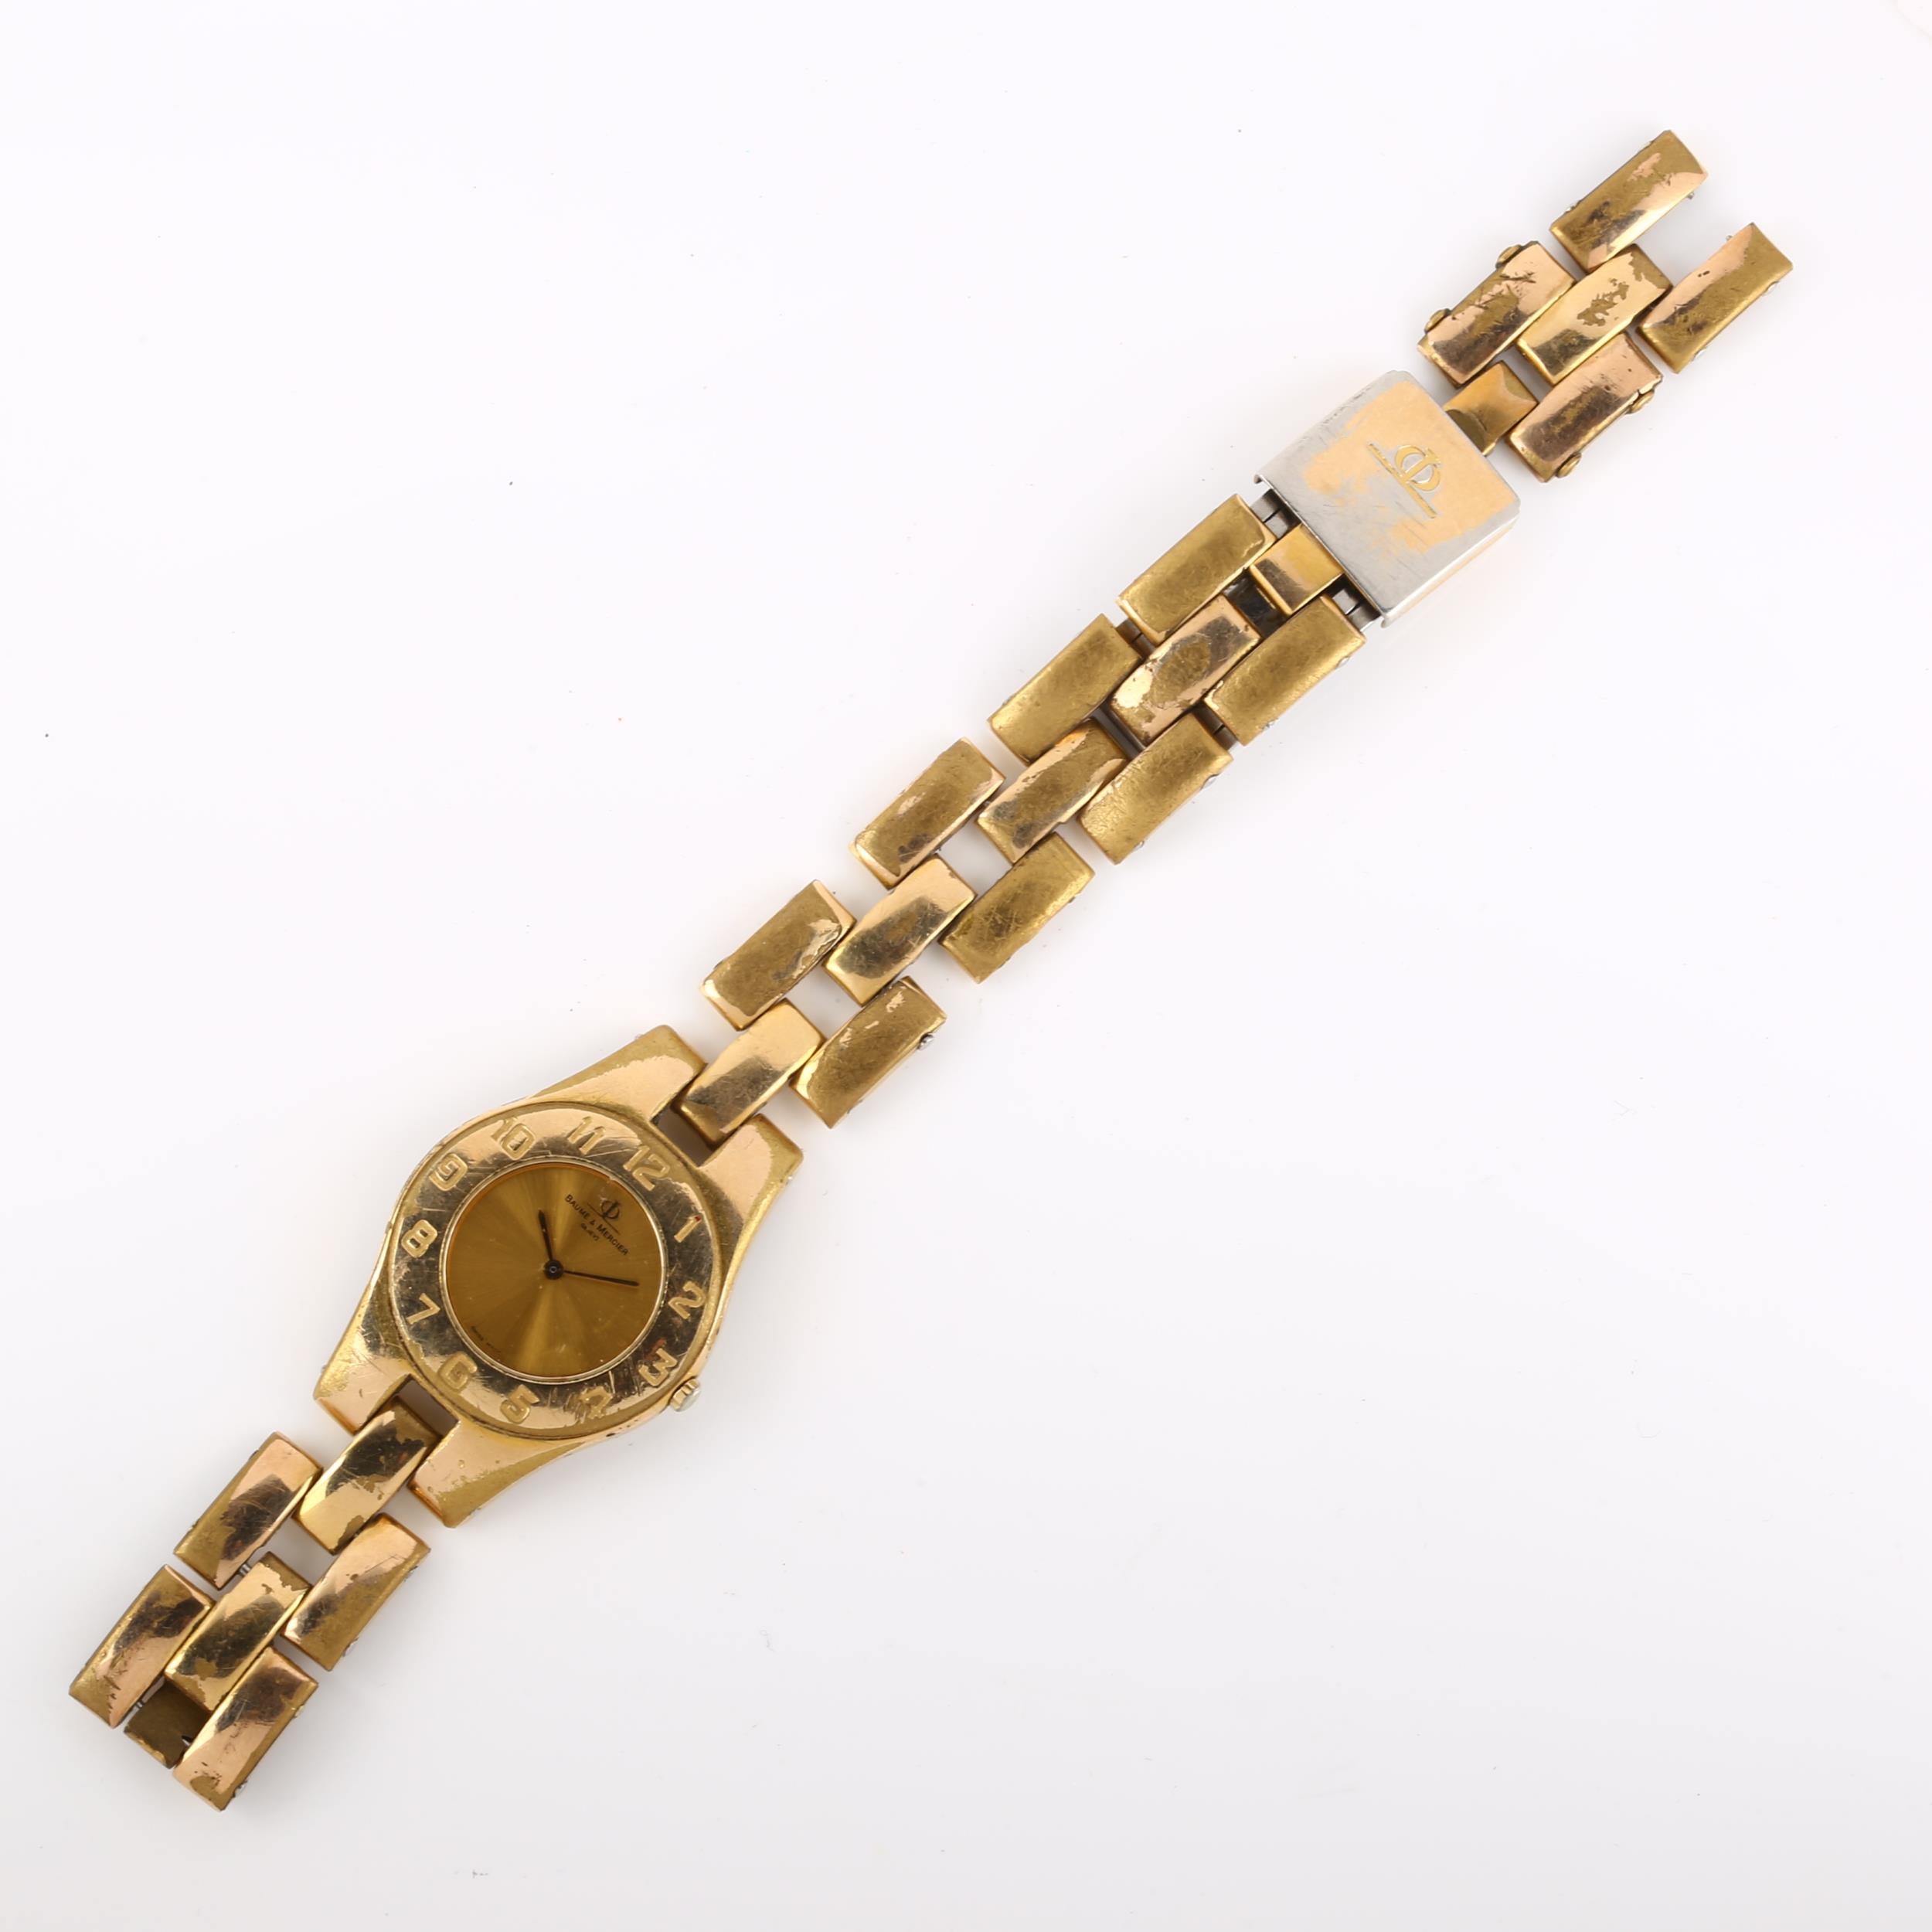 BAUME & MERCIER - a mid-size gold plated stainless steel quartz bracelet watch, champagne dial - Image 2 of 4